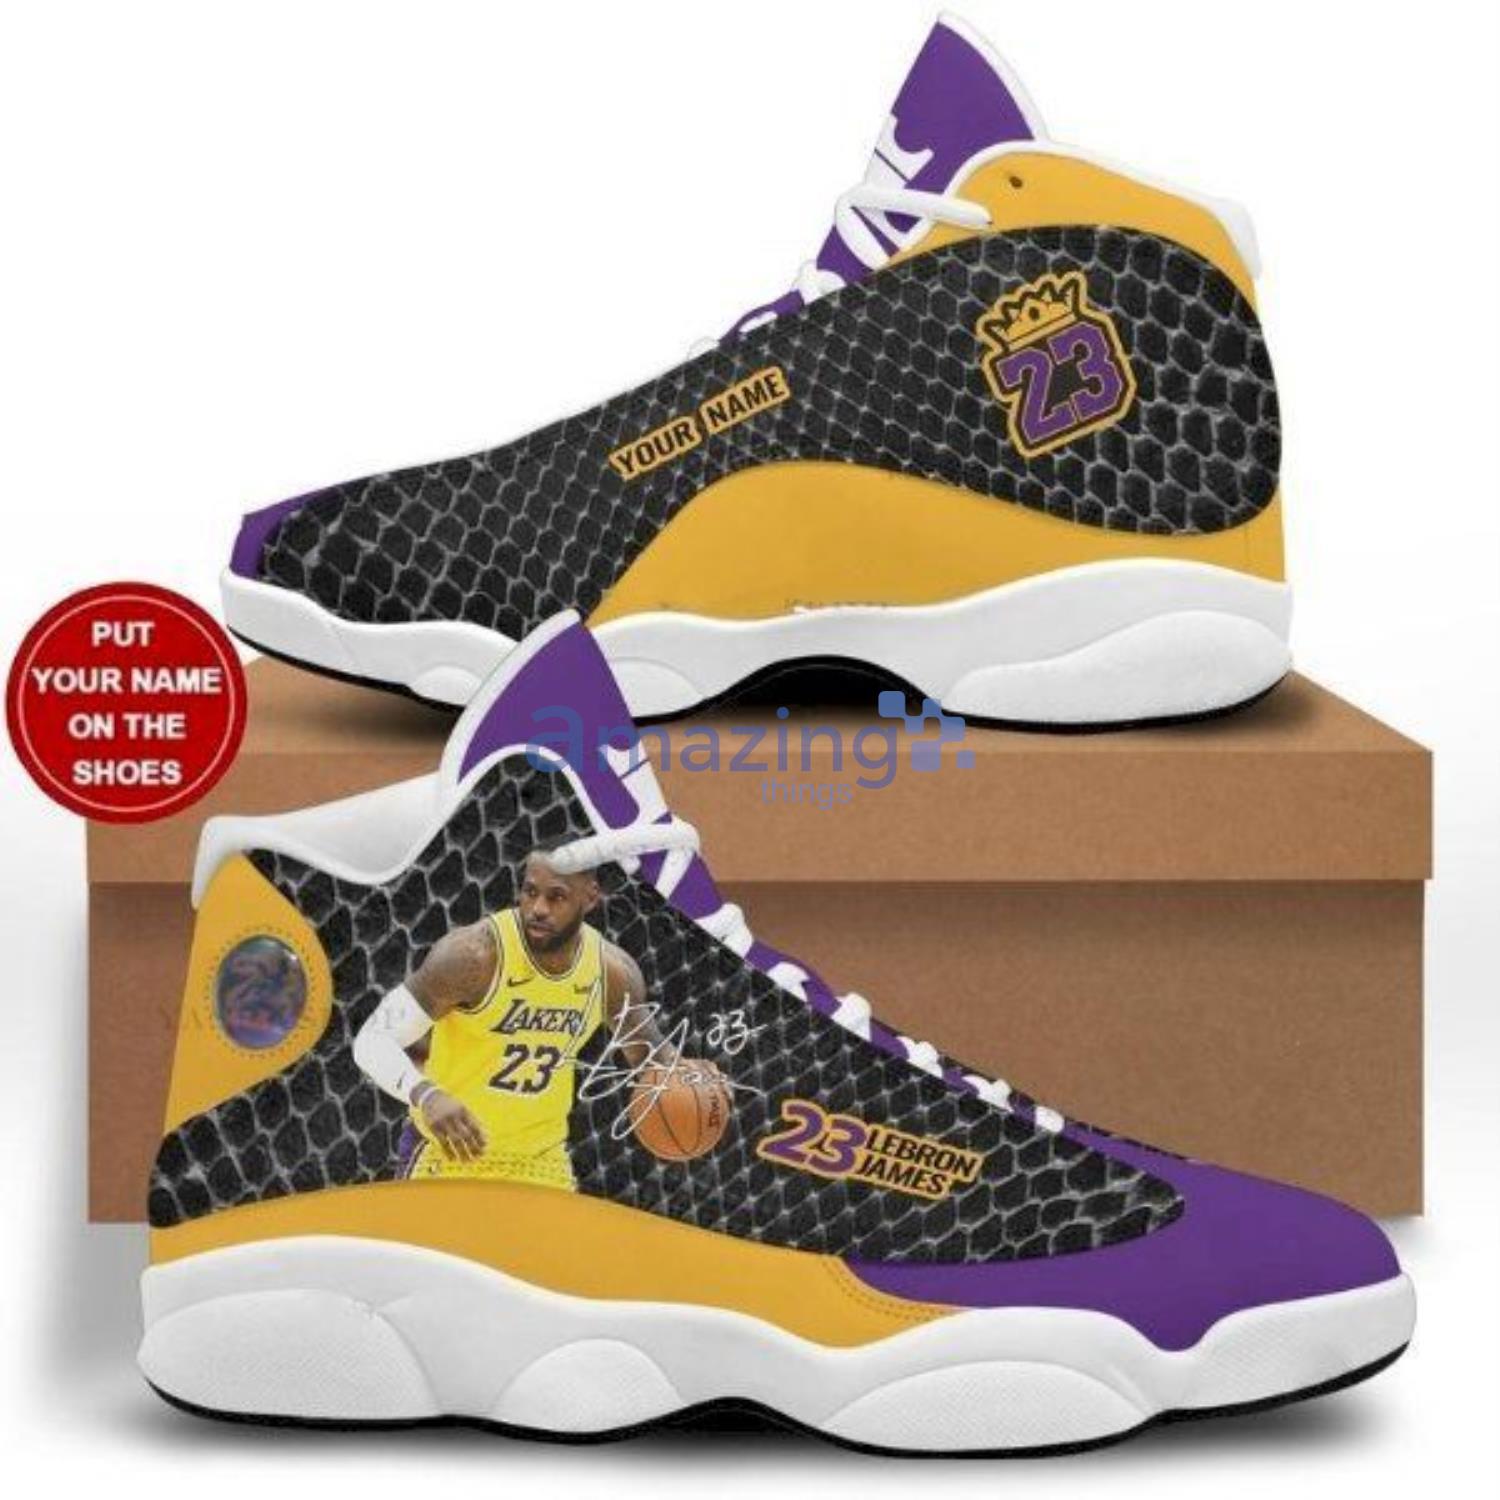 Personalized Lebron James 23-Personalized Your Name Air Jordan 13 Shoes